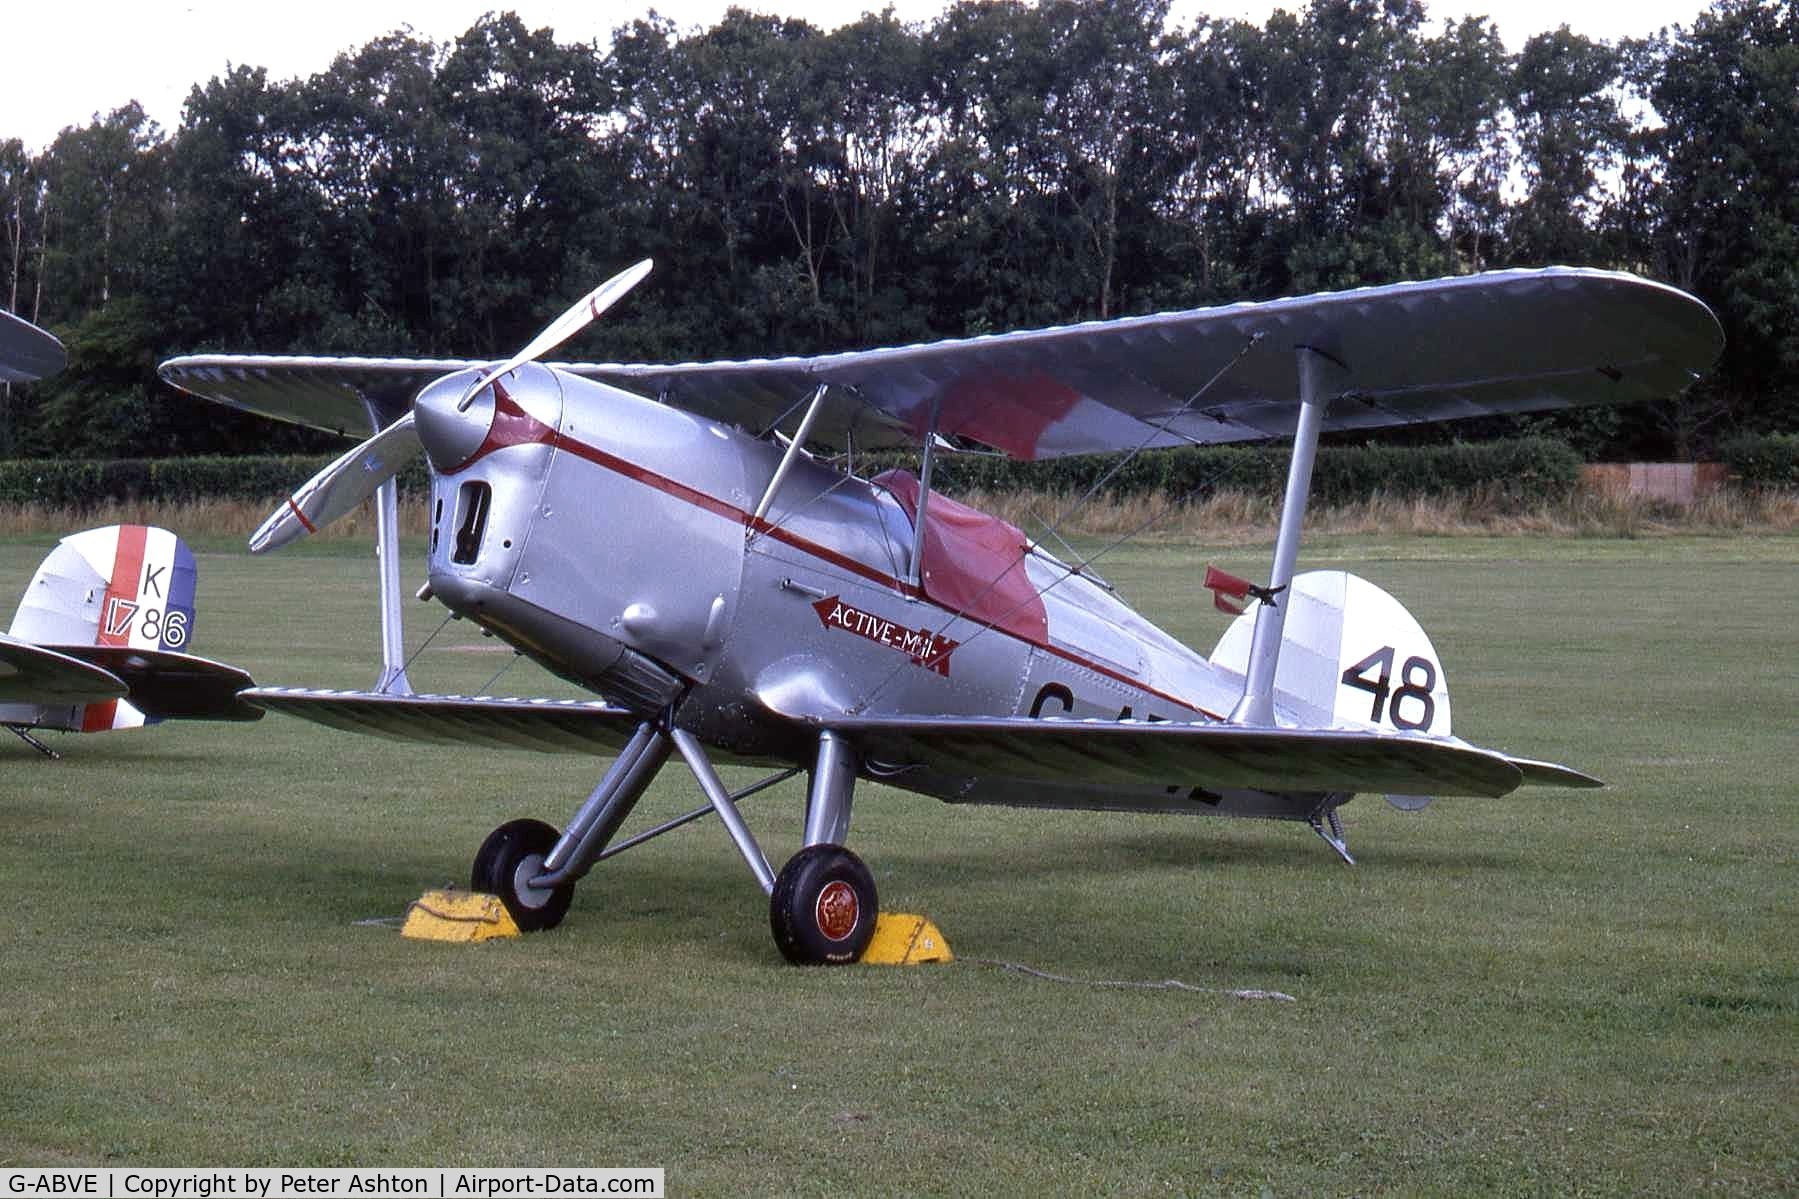 G-ABVE, 1932 Arrow Active 2 C/N 2, Old Warden, Bedfordshire, England. August 1993